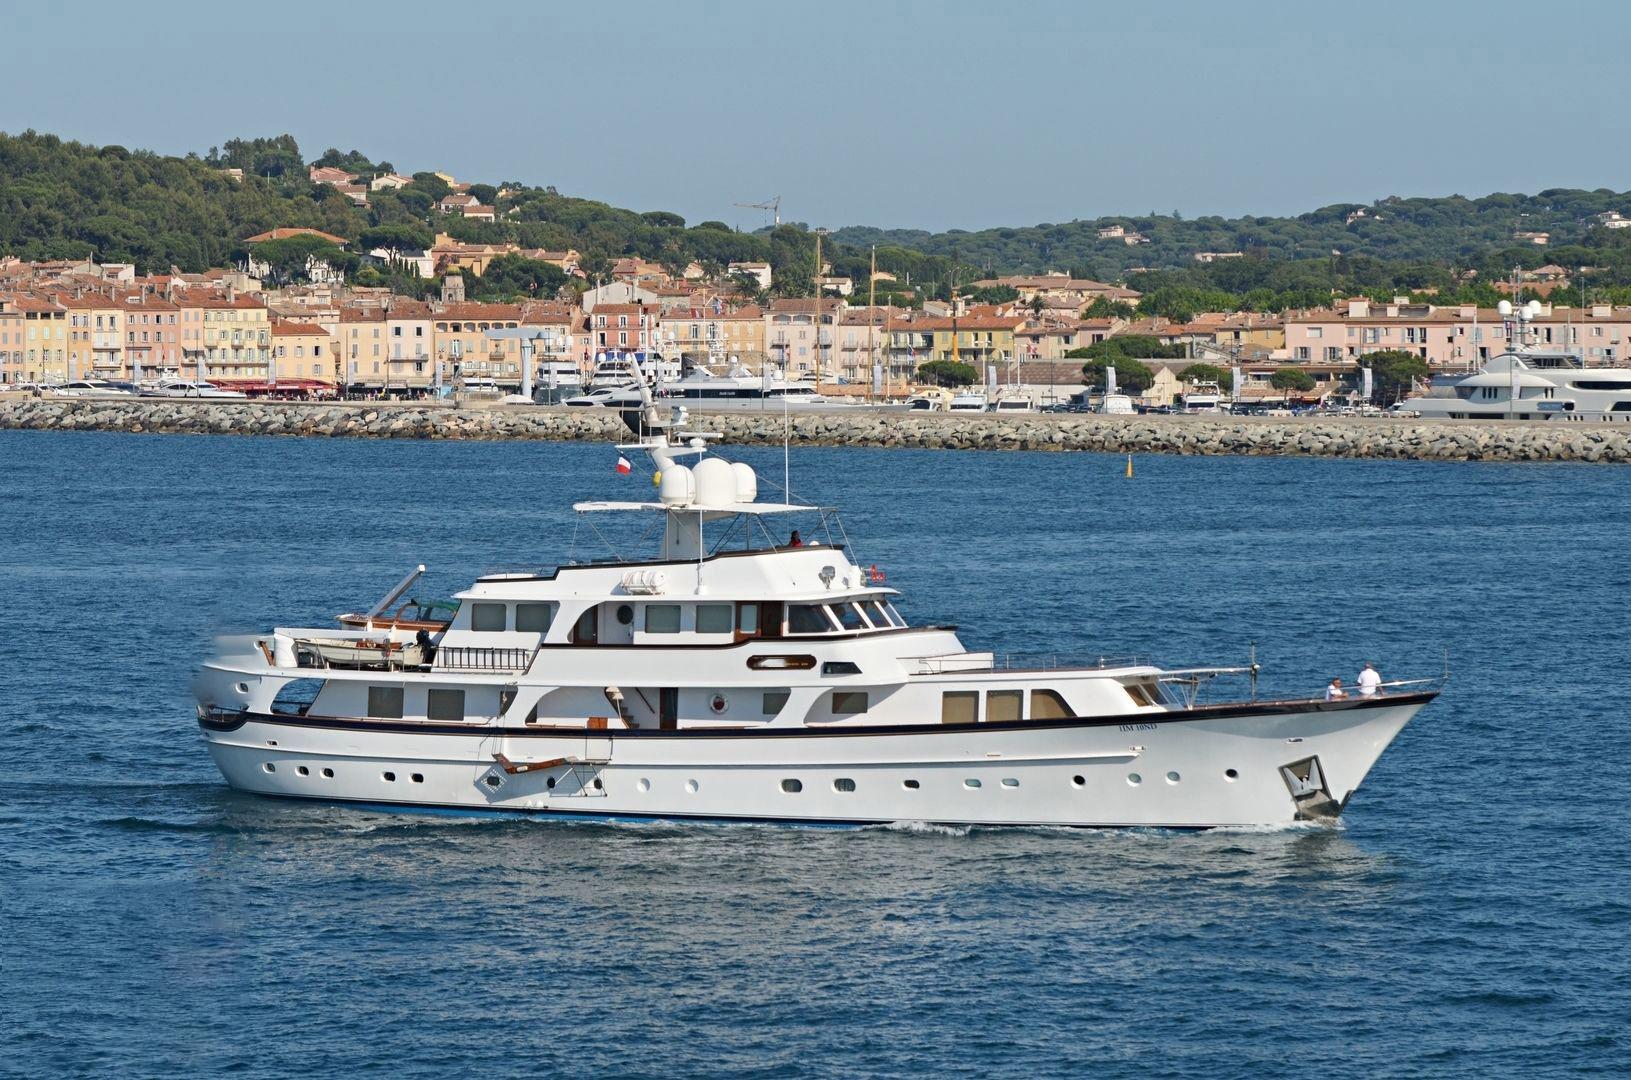 Best Feadship Yachts for sale, Feadship Boats for Sale